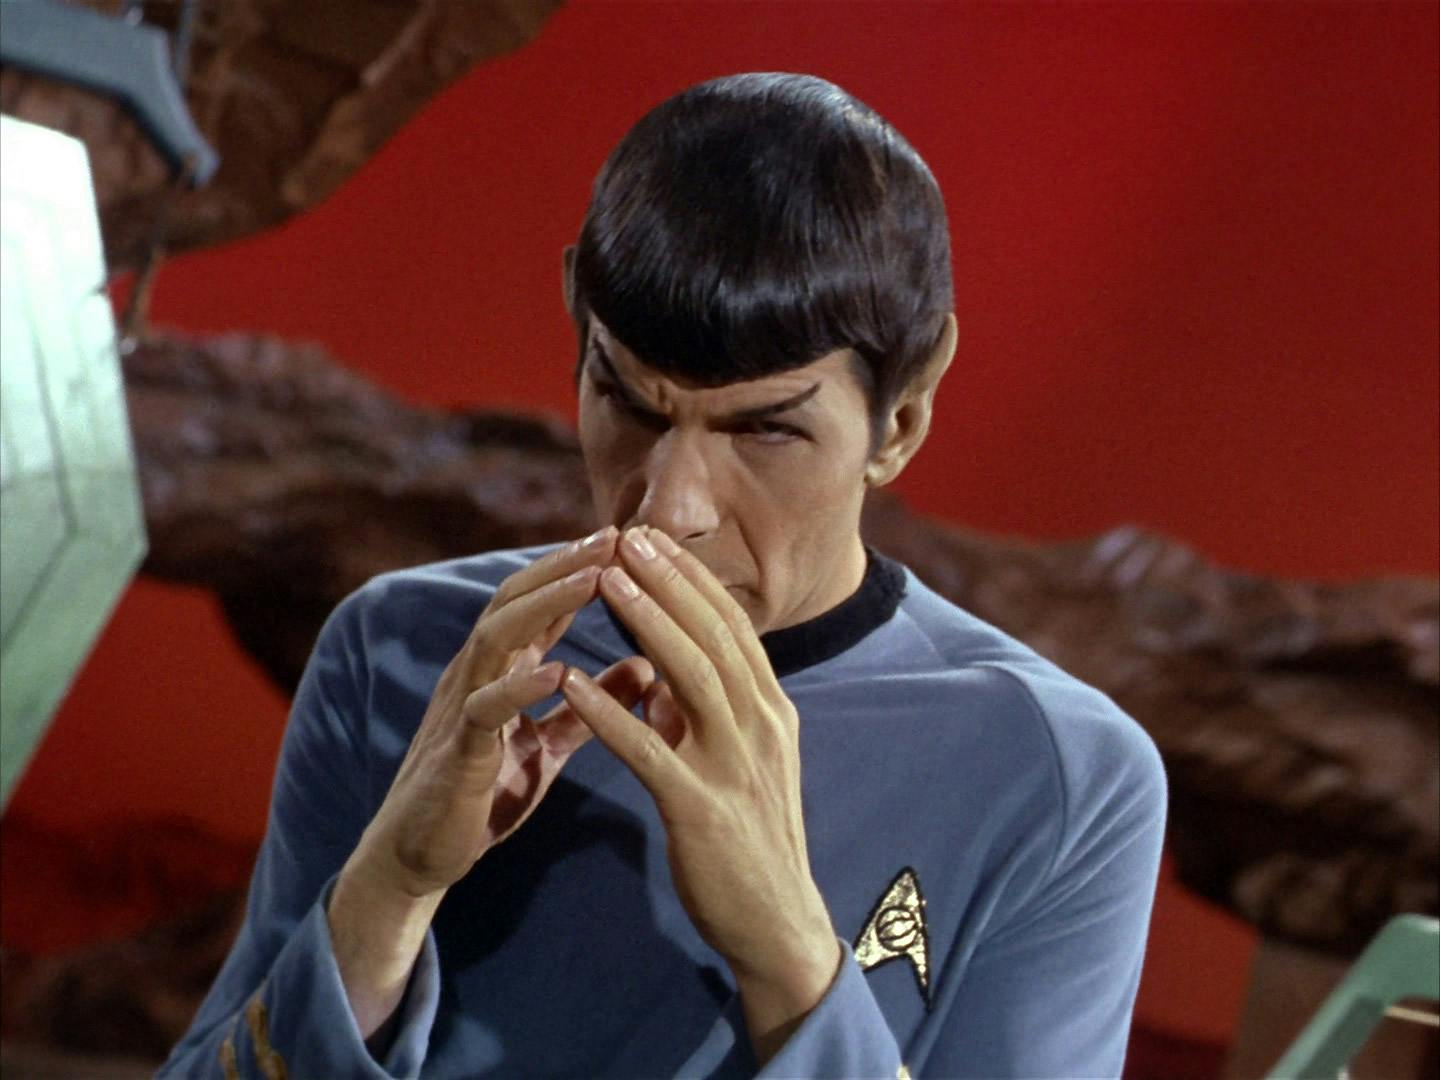 Experiencing pon farr, on Vulcan, Spock with his face to his hands, is in plak tow, or 'blood fever' in 'Amok Time'